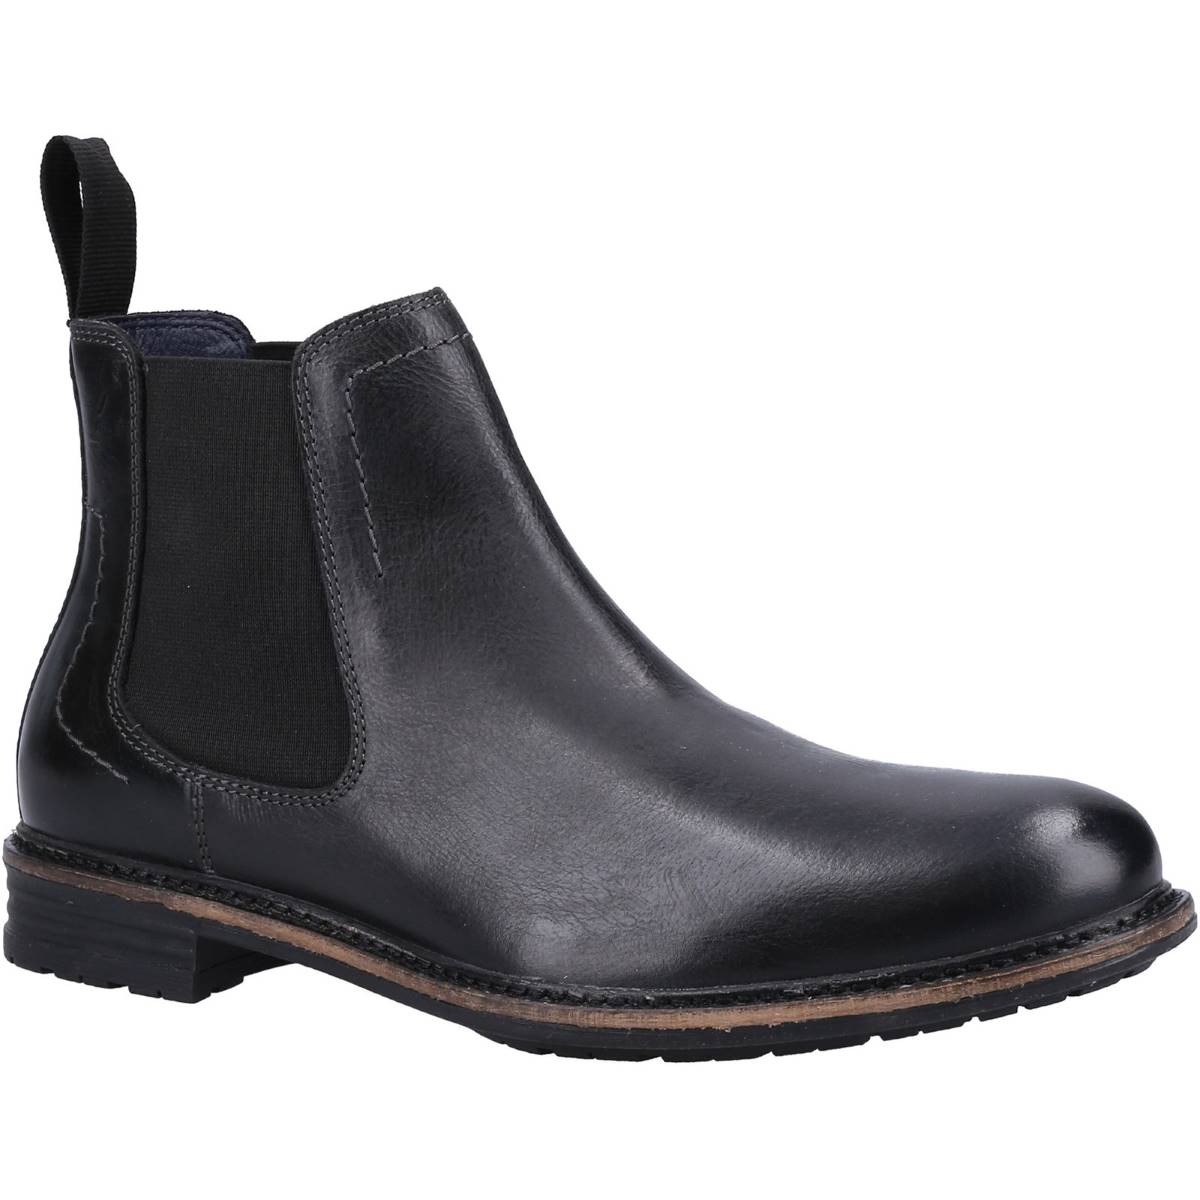 Hush Puppies Justin Chelsea Black Mens boots HP-35651-70616 in a Plain Leather in Size 11